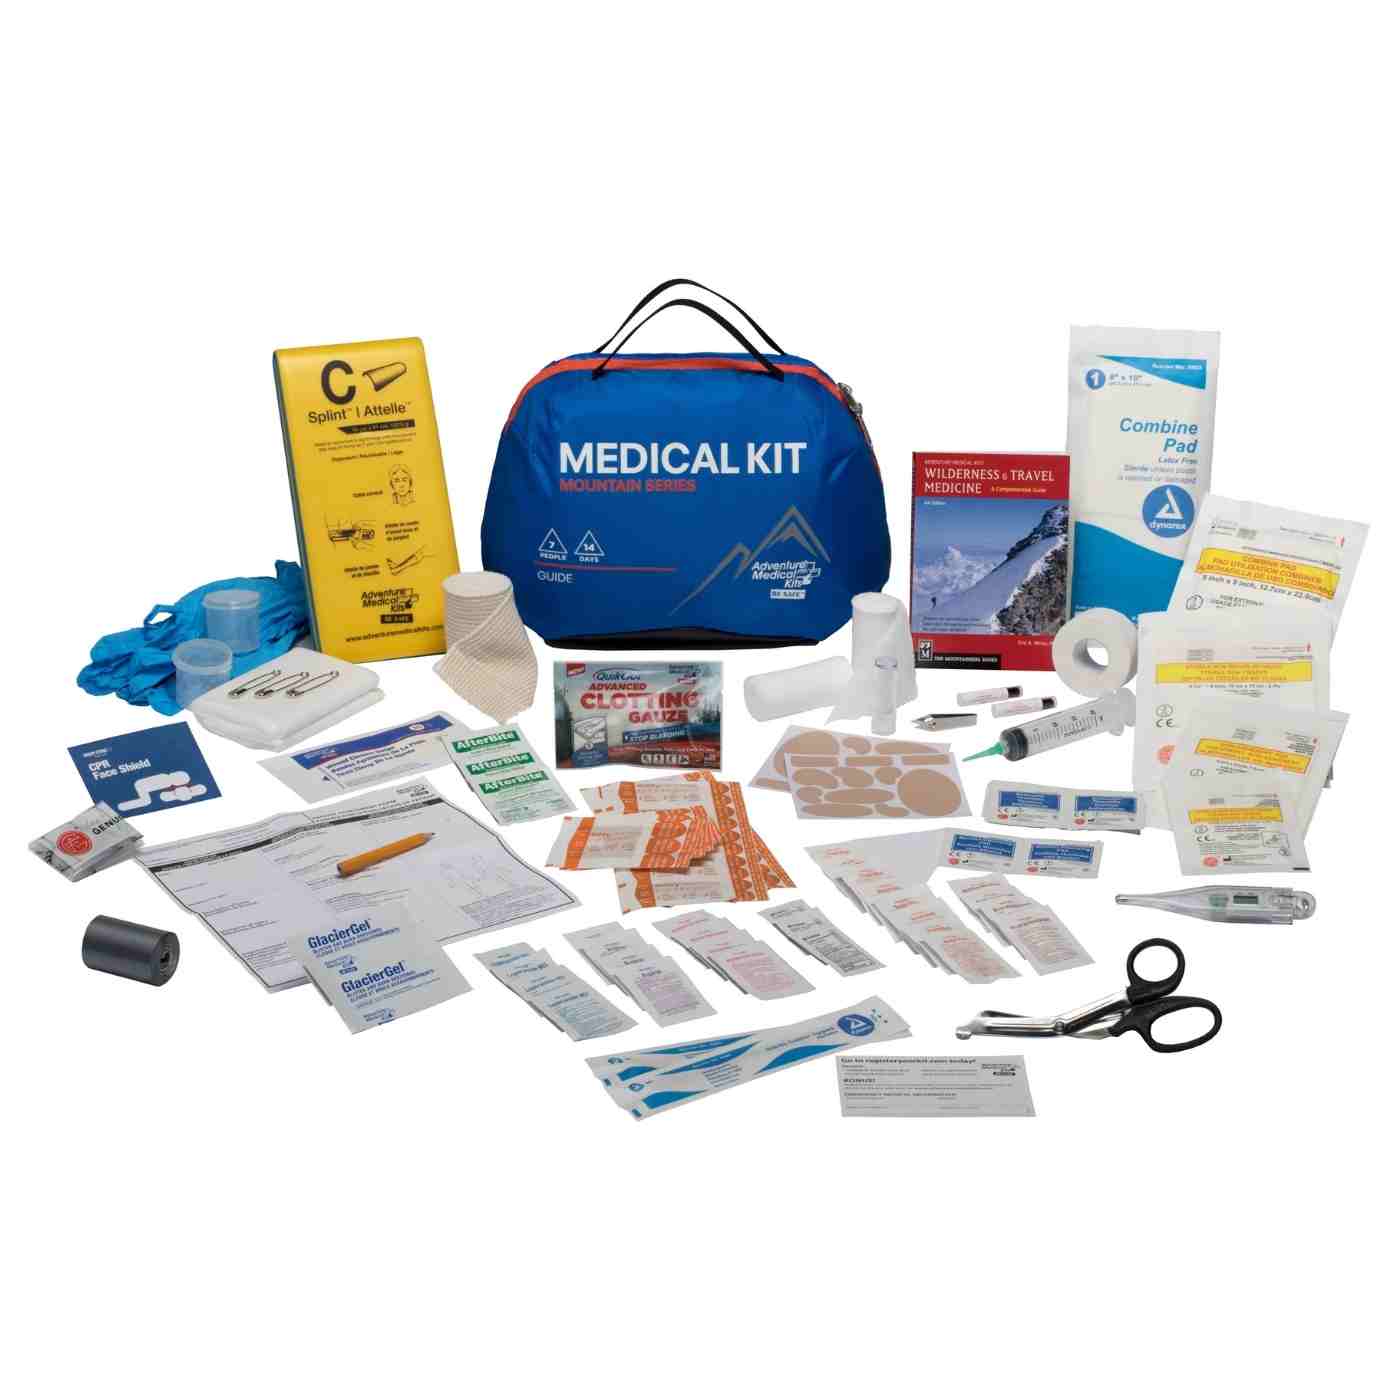 Mountain Series Medical Kit - Guide contents